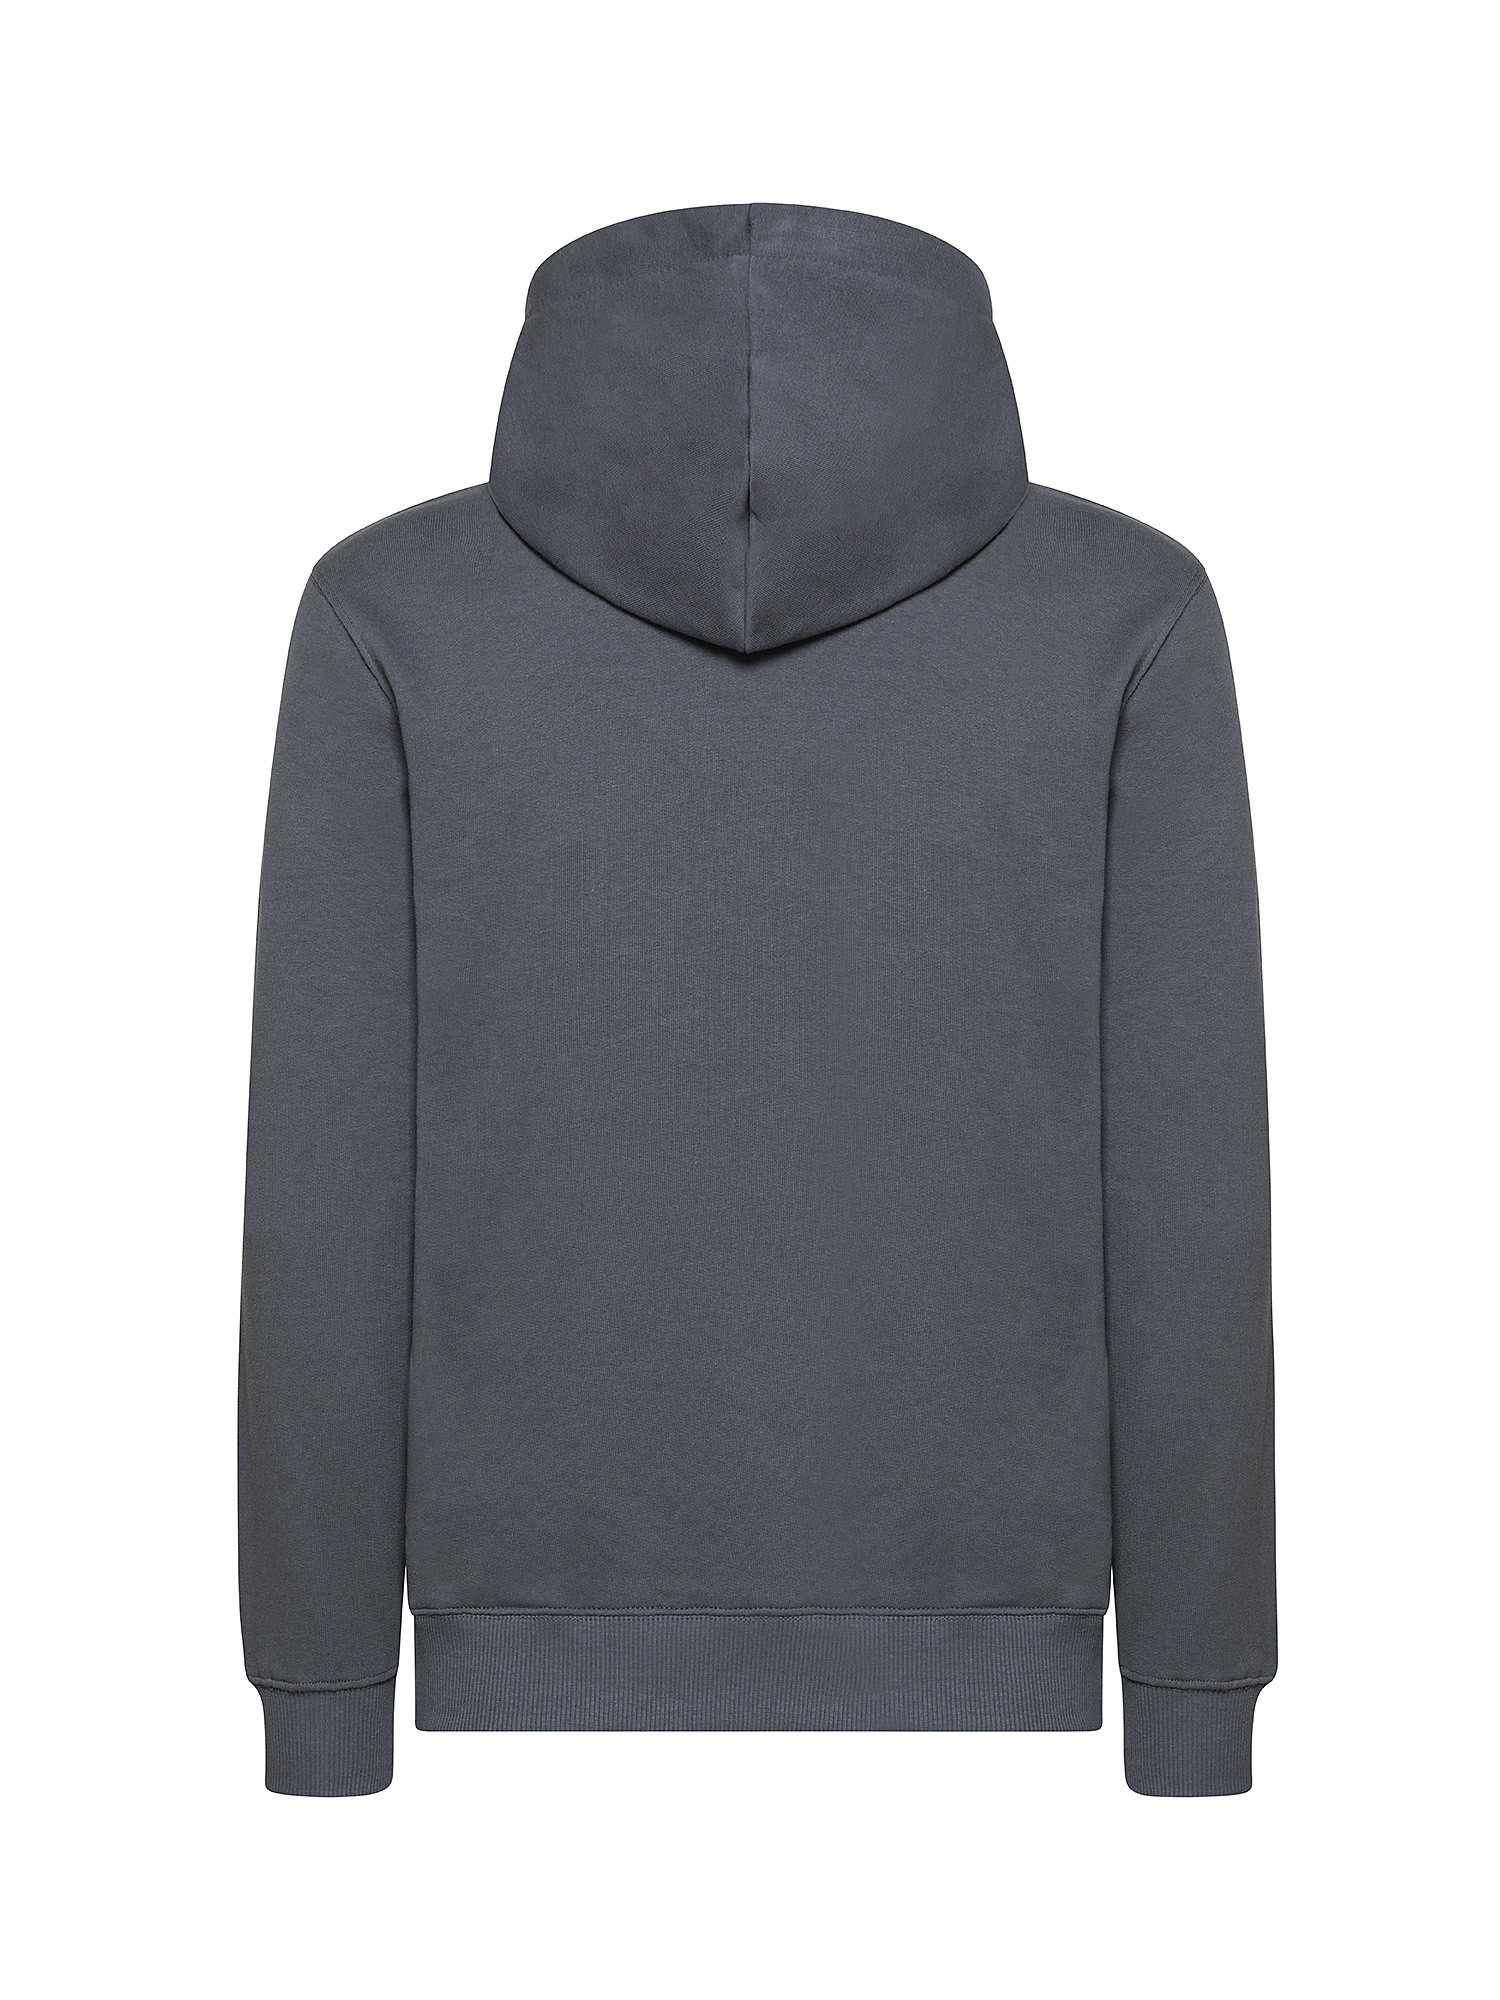 Pepe Jeans - Sweatshirt with hood and logo, Anthracite, large image number 1